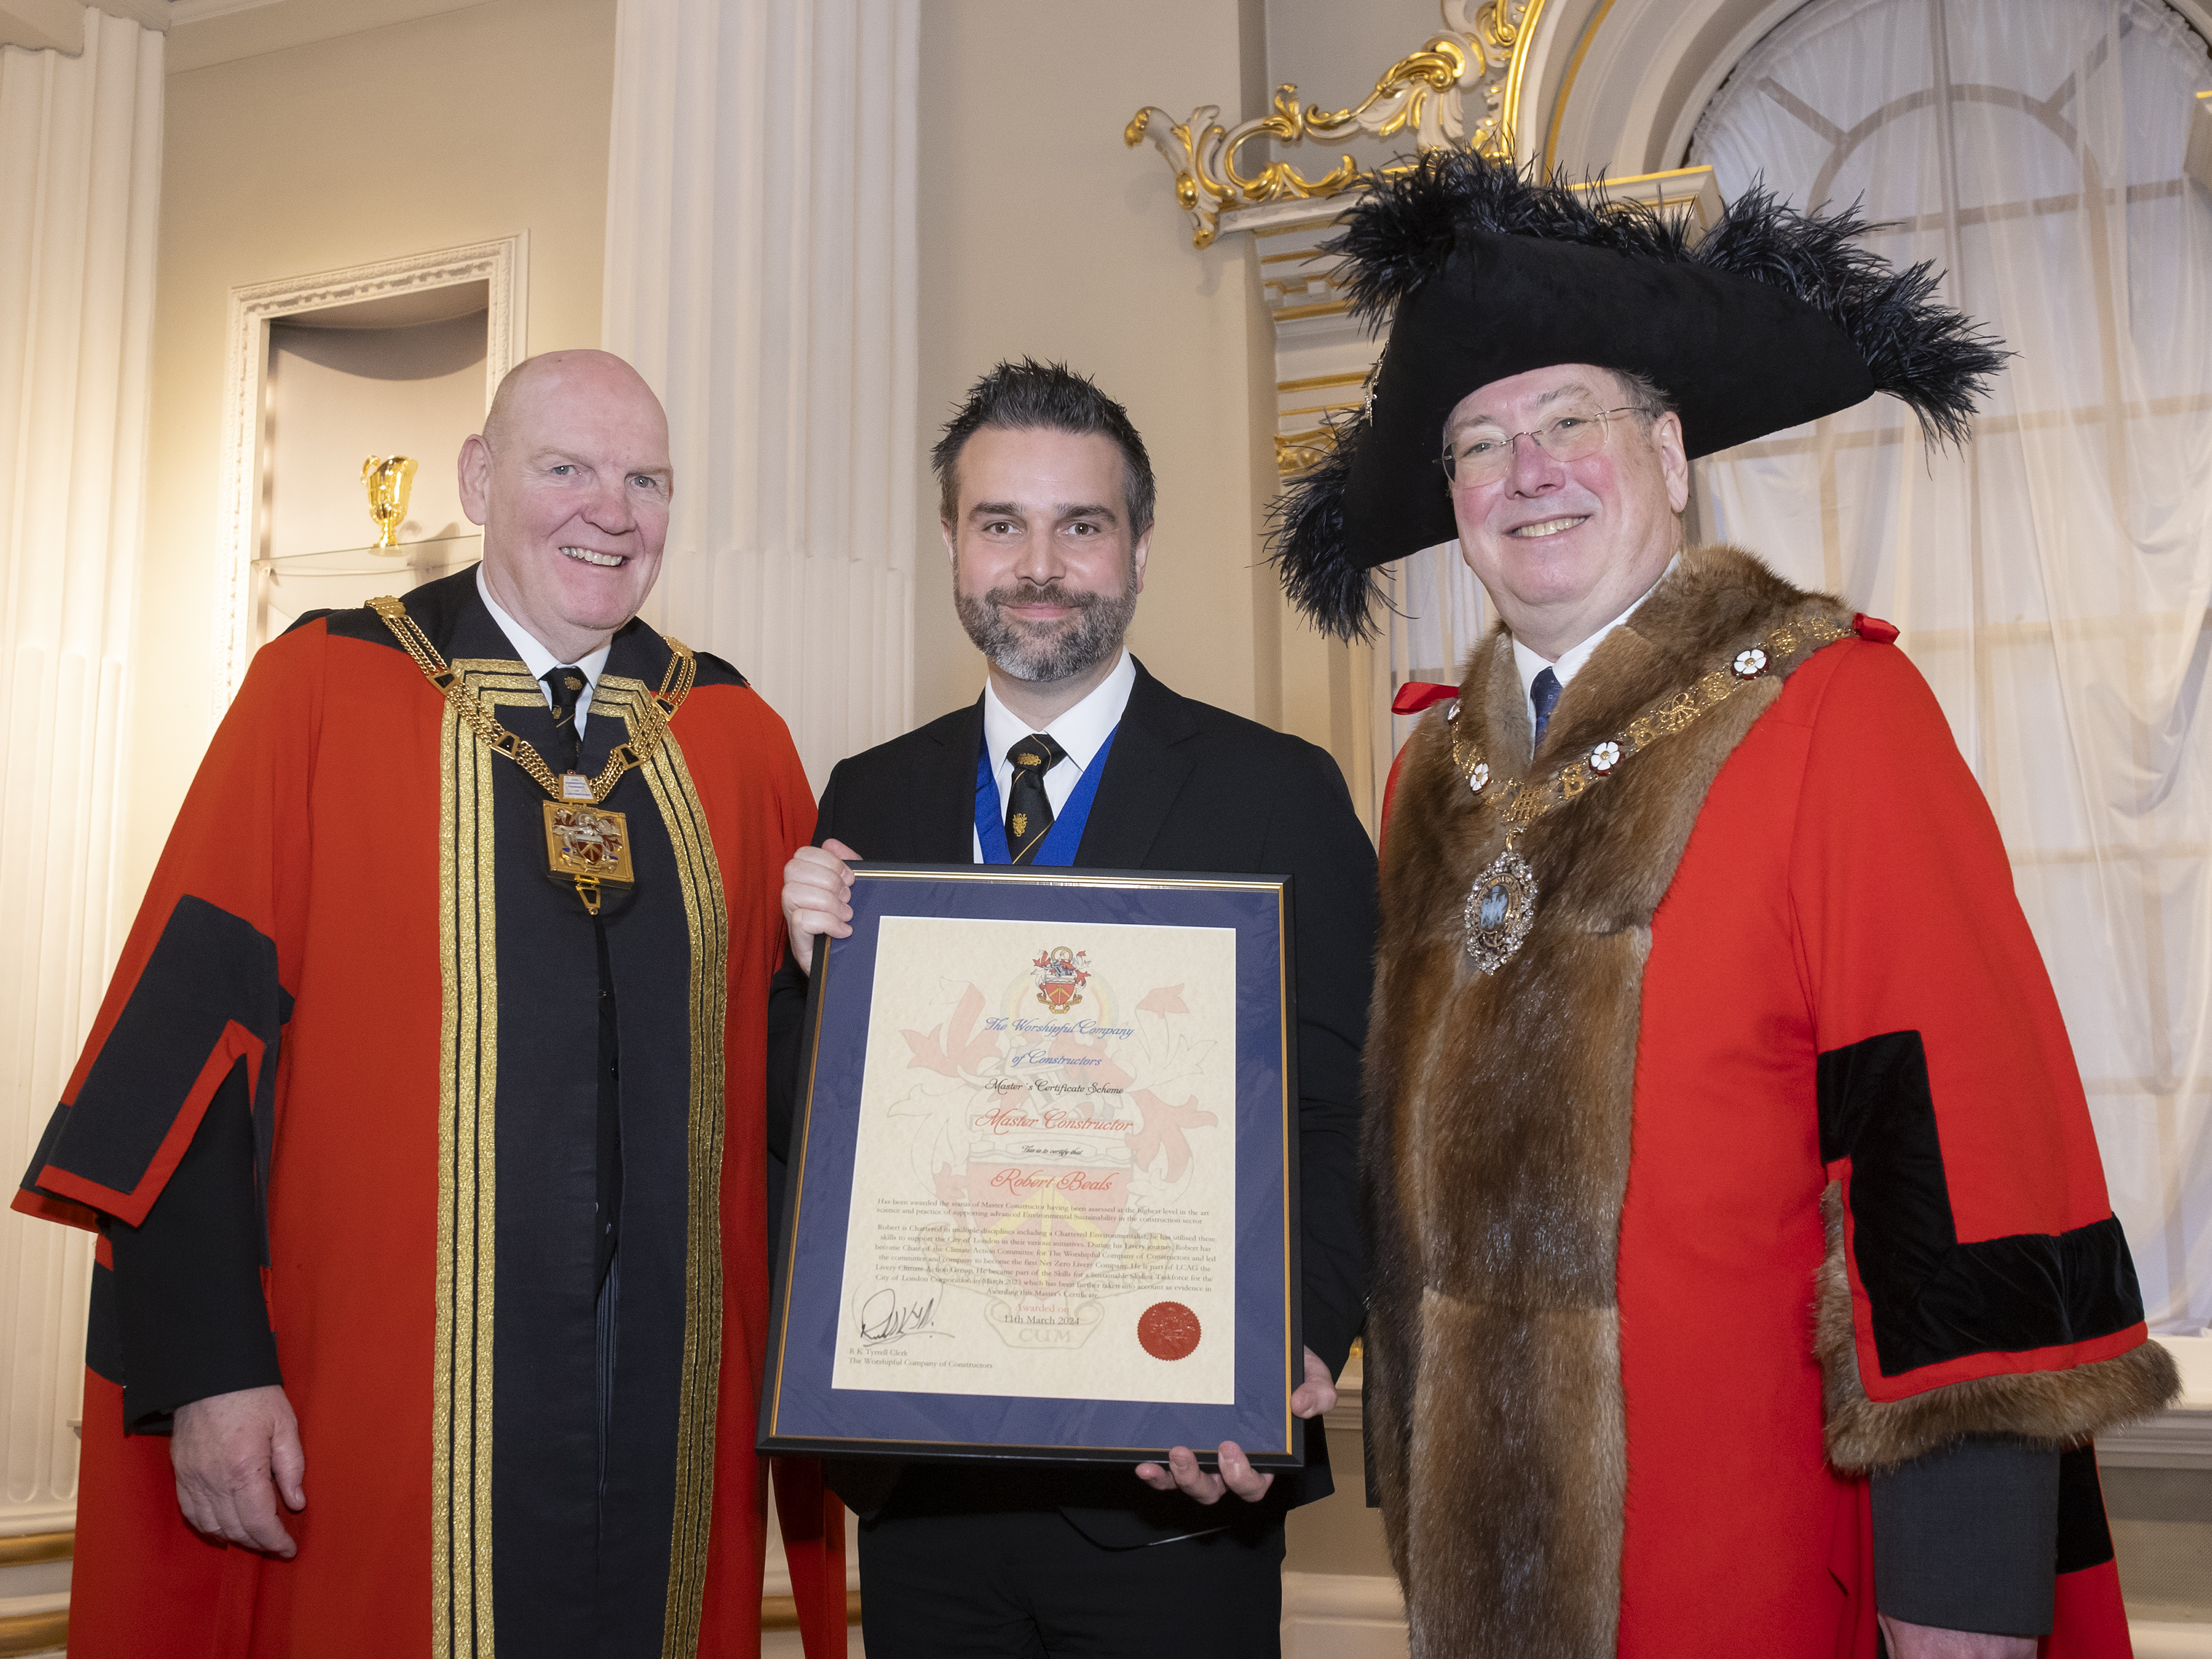 Rob Beales Is Awarded Prestigious Master Certificate By The Rt Hon. The Lord Mayor Of London.